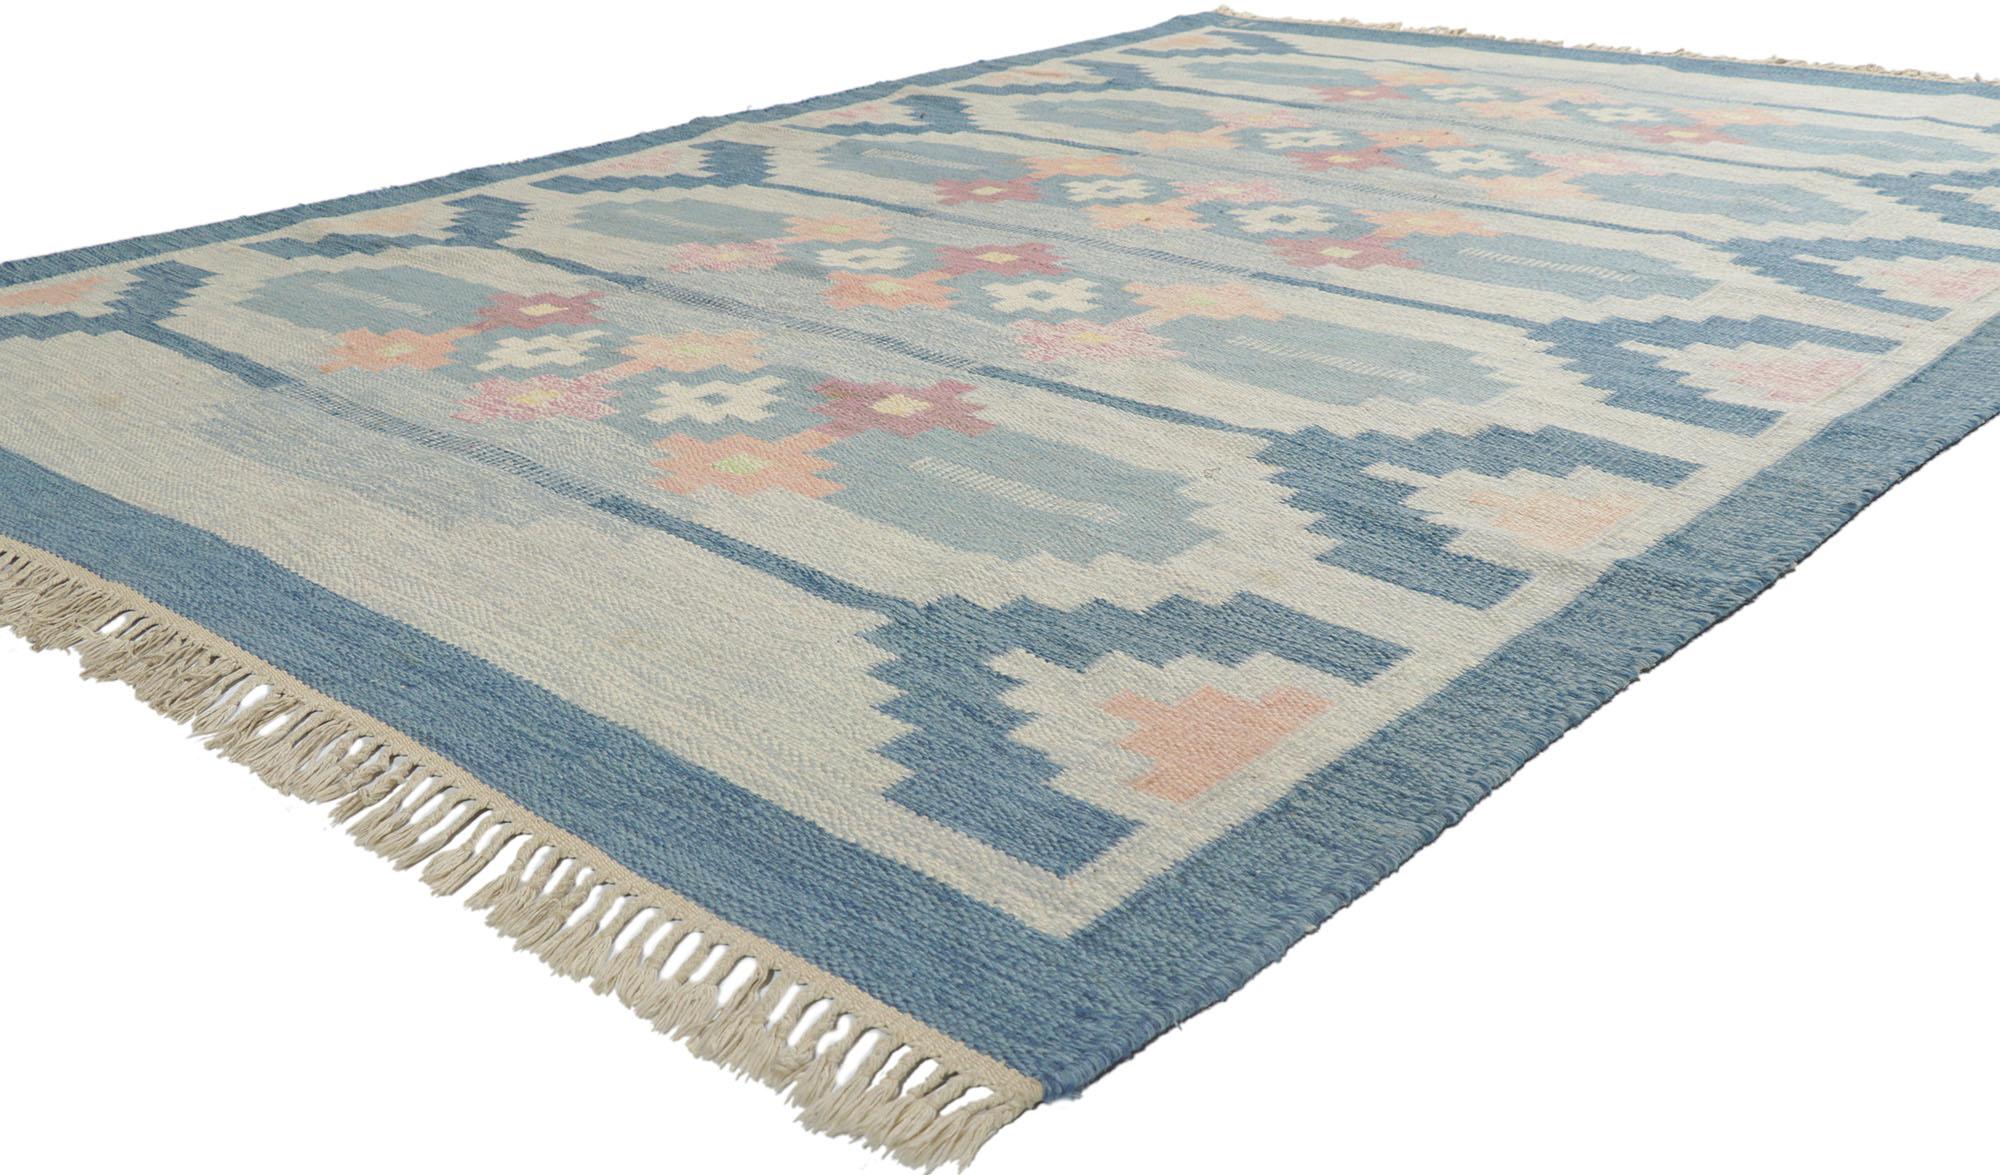 78246 Vintage Swedish Rollakan Rug by Ingegerd Silow, 06'07 x 09'07. Reflecting elements of Scandinavian Modern style with incredible detail and texture, this handwoven vintage Swedish rollakan rug is a captivating vision of woven beauty. The